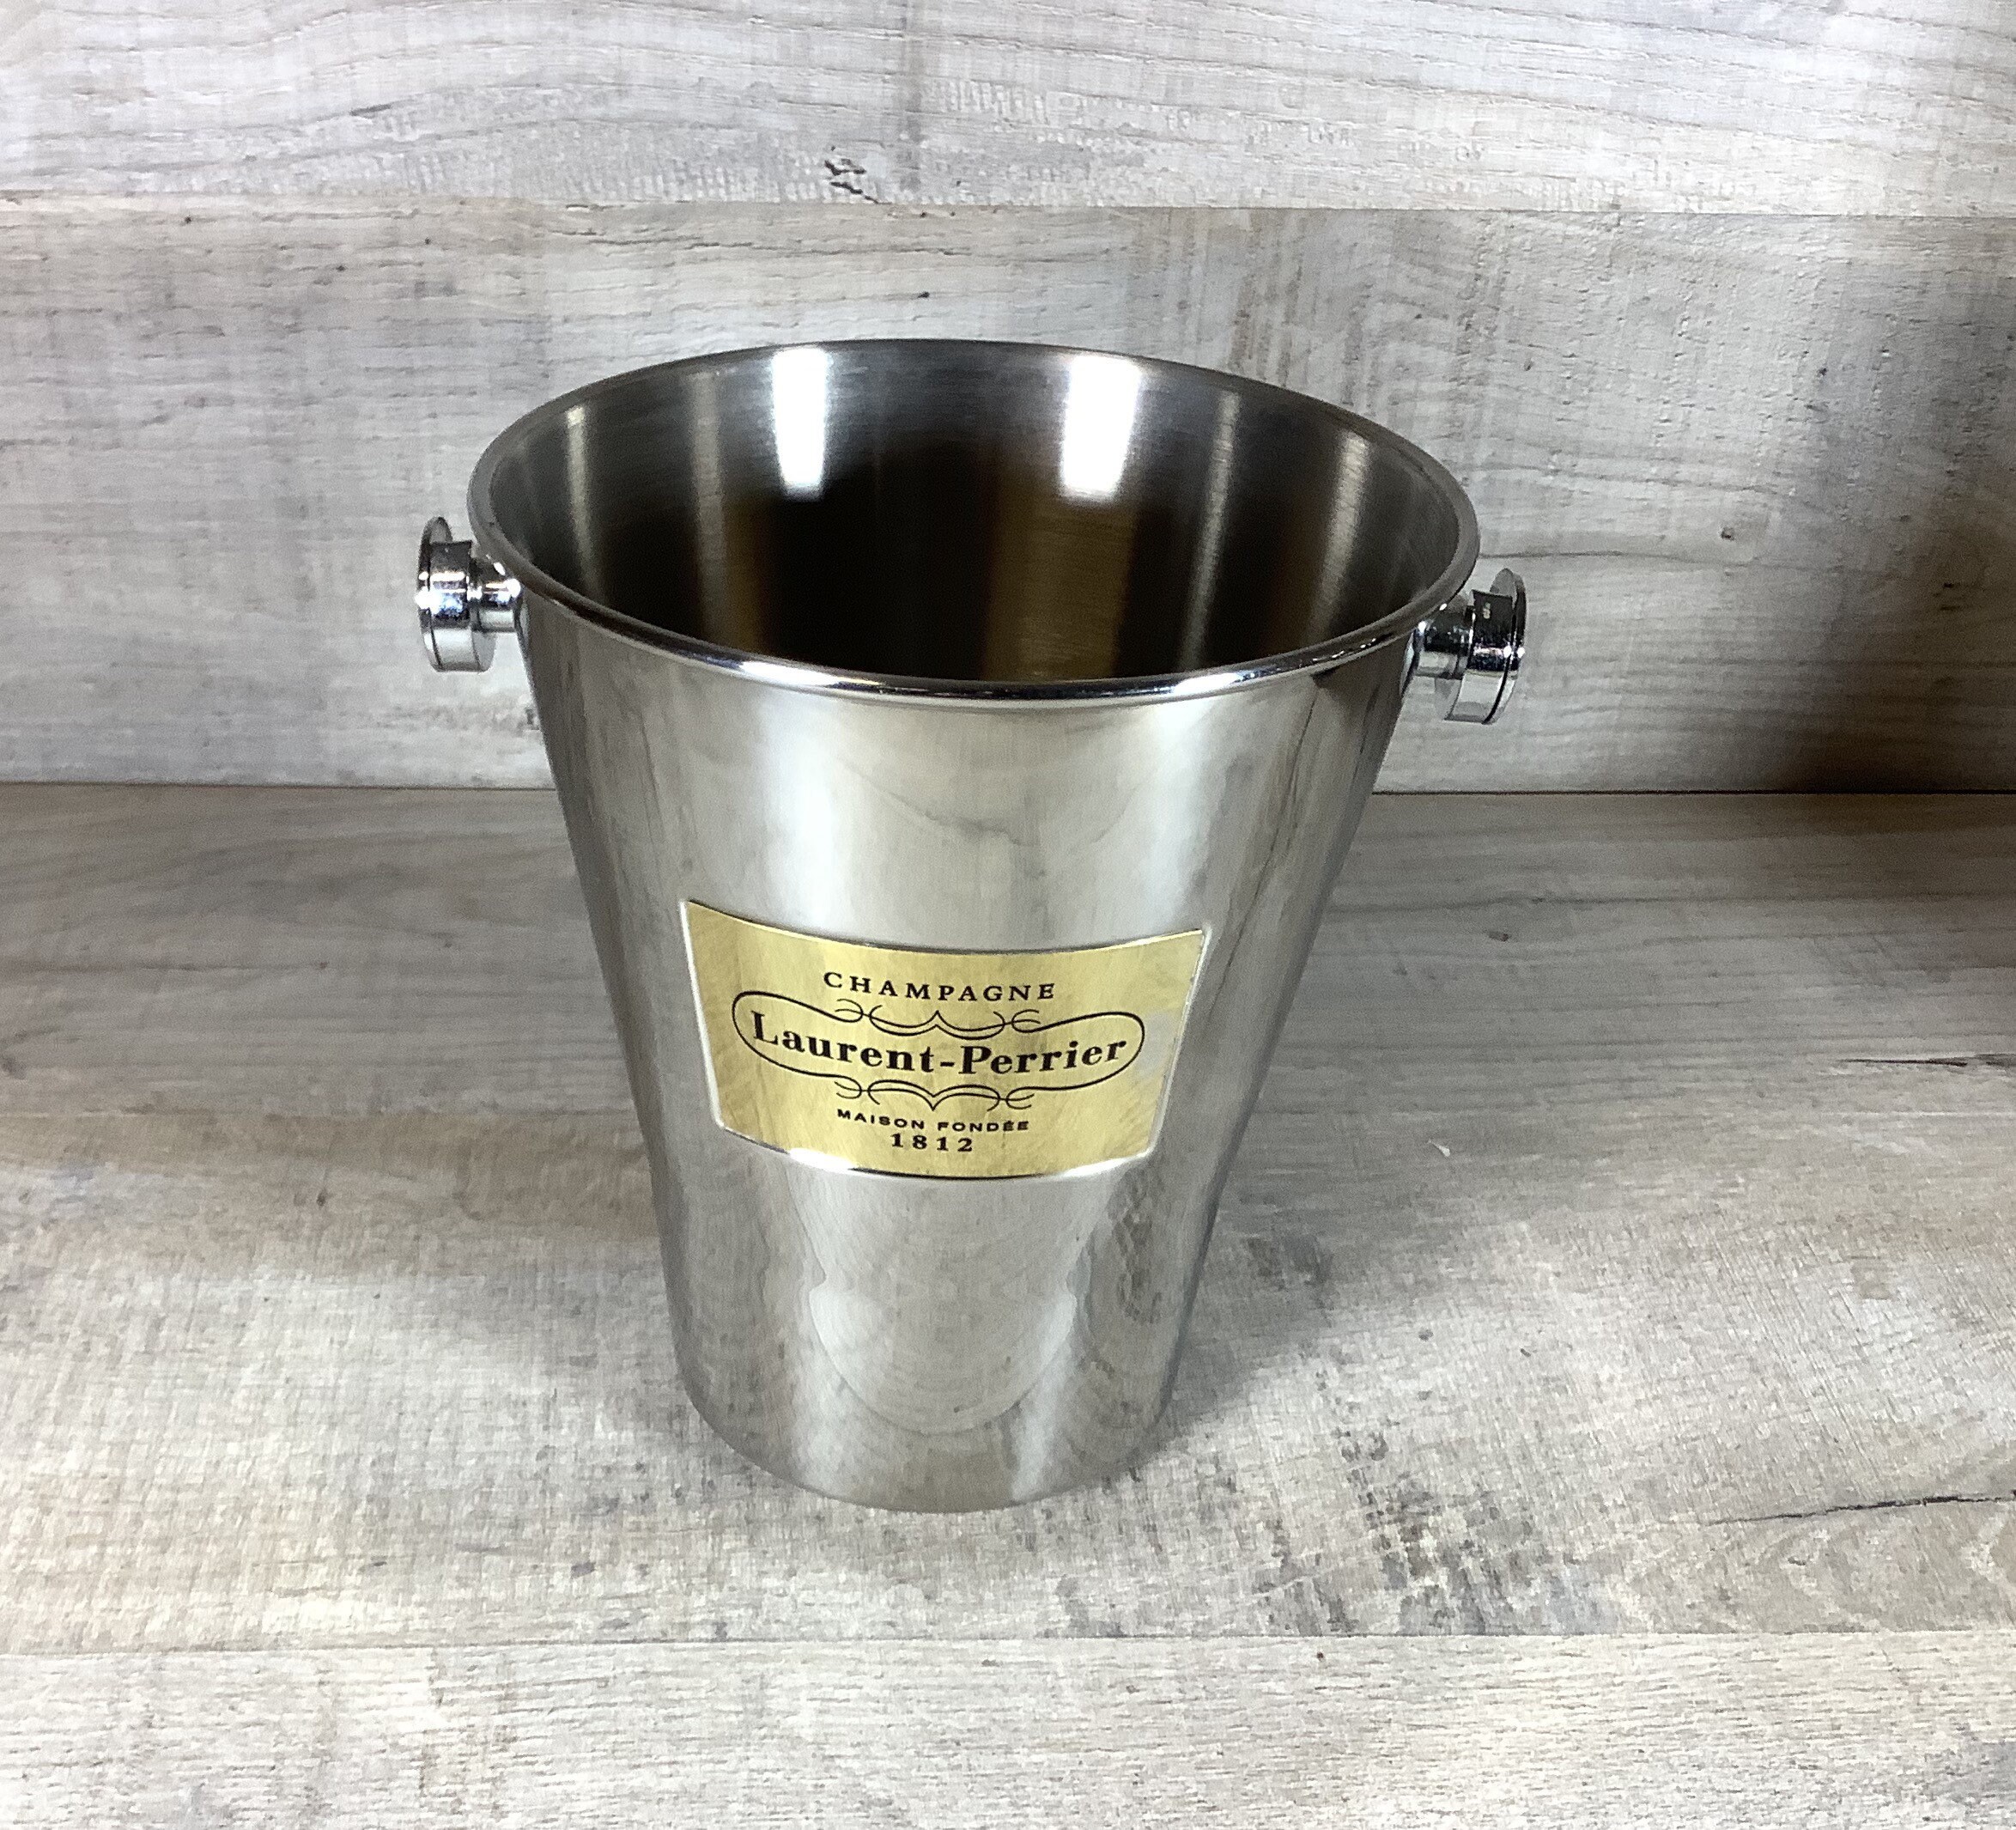 Seau Champagne Laurent Perrier/ Champagne Ice Bucket From Vintage/Wine Champagne